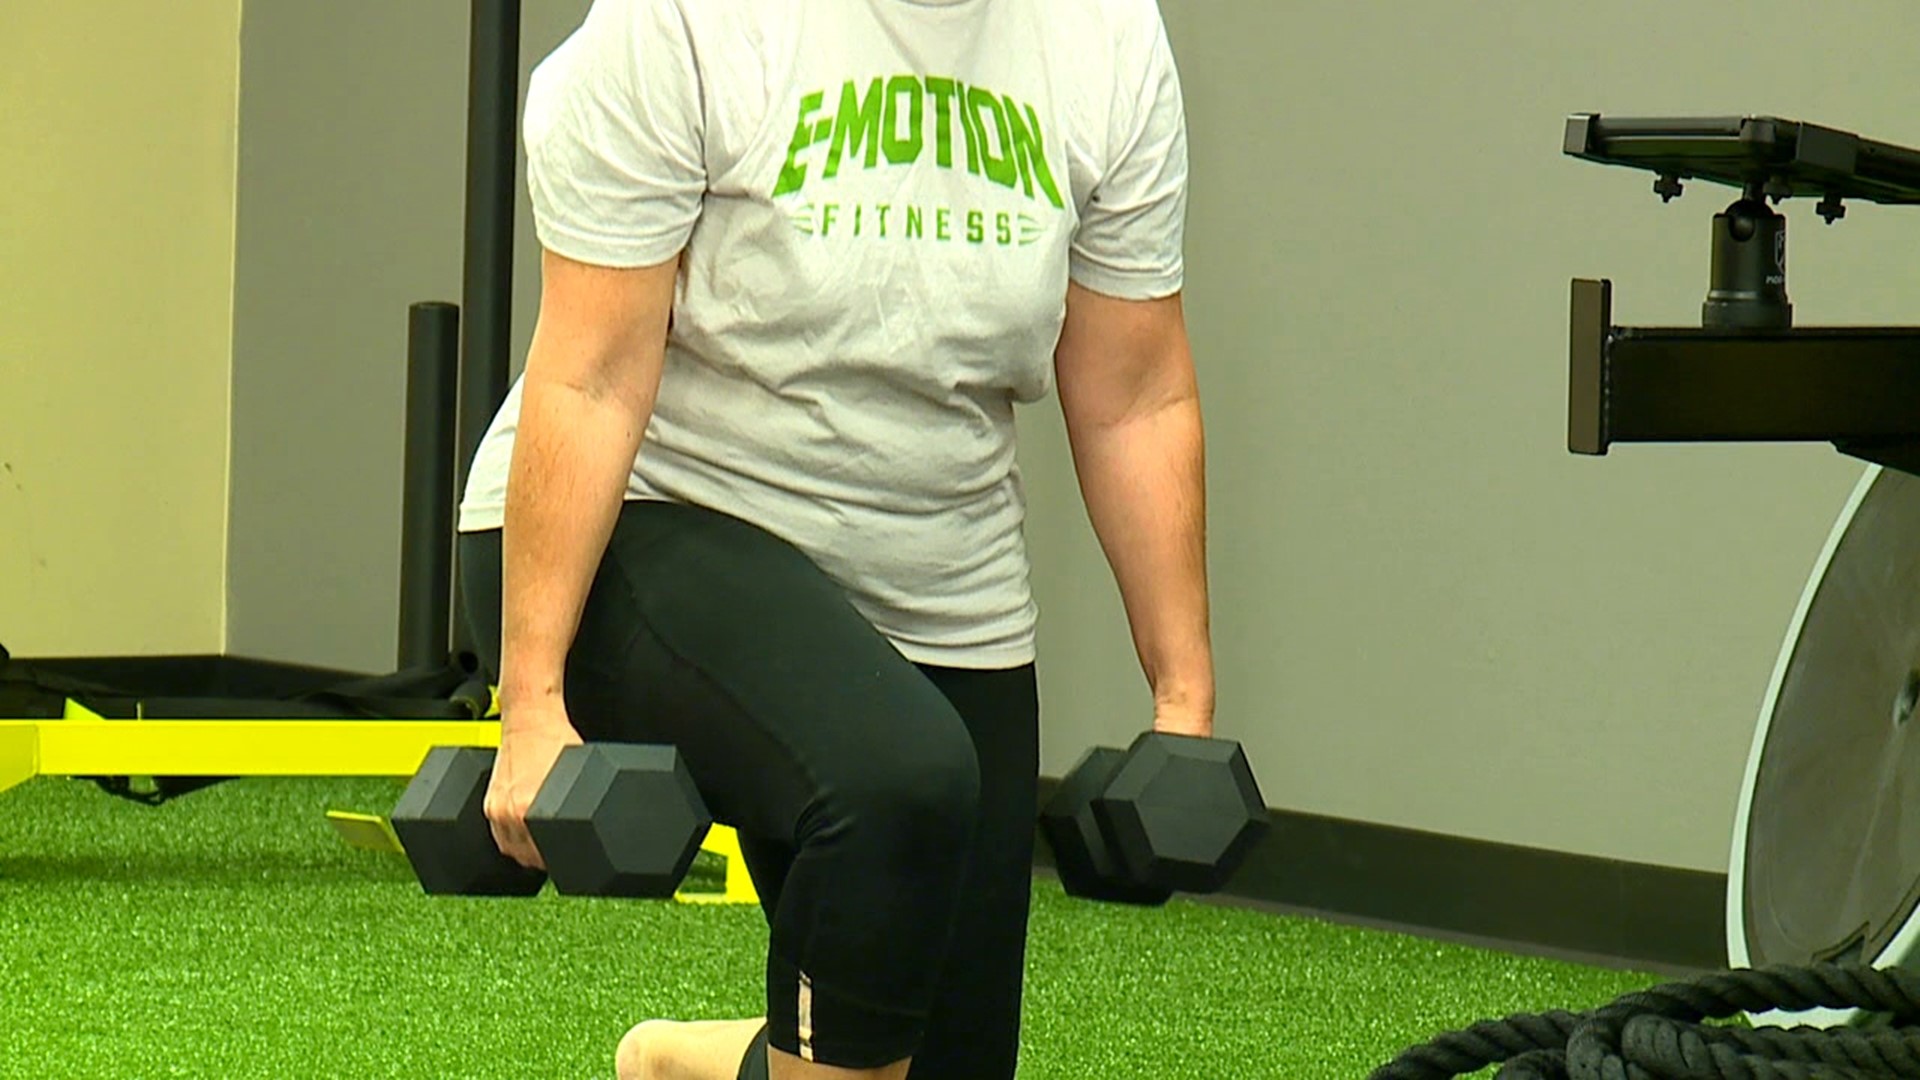 E-Motion Fitness, a women-only gym, has opened in Lackawanna County